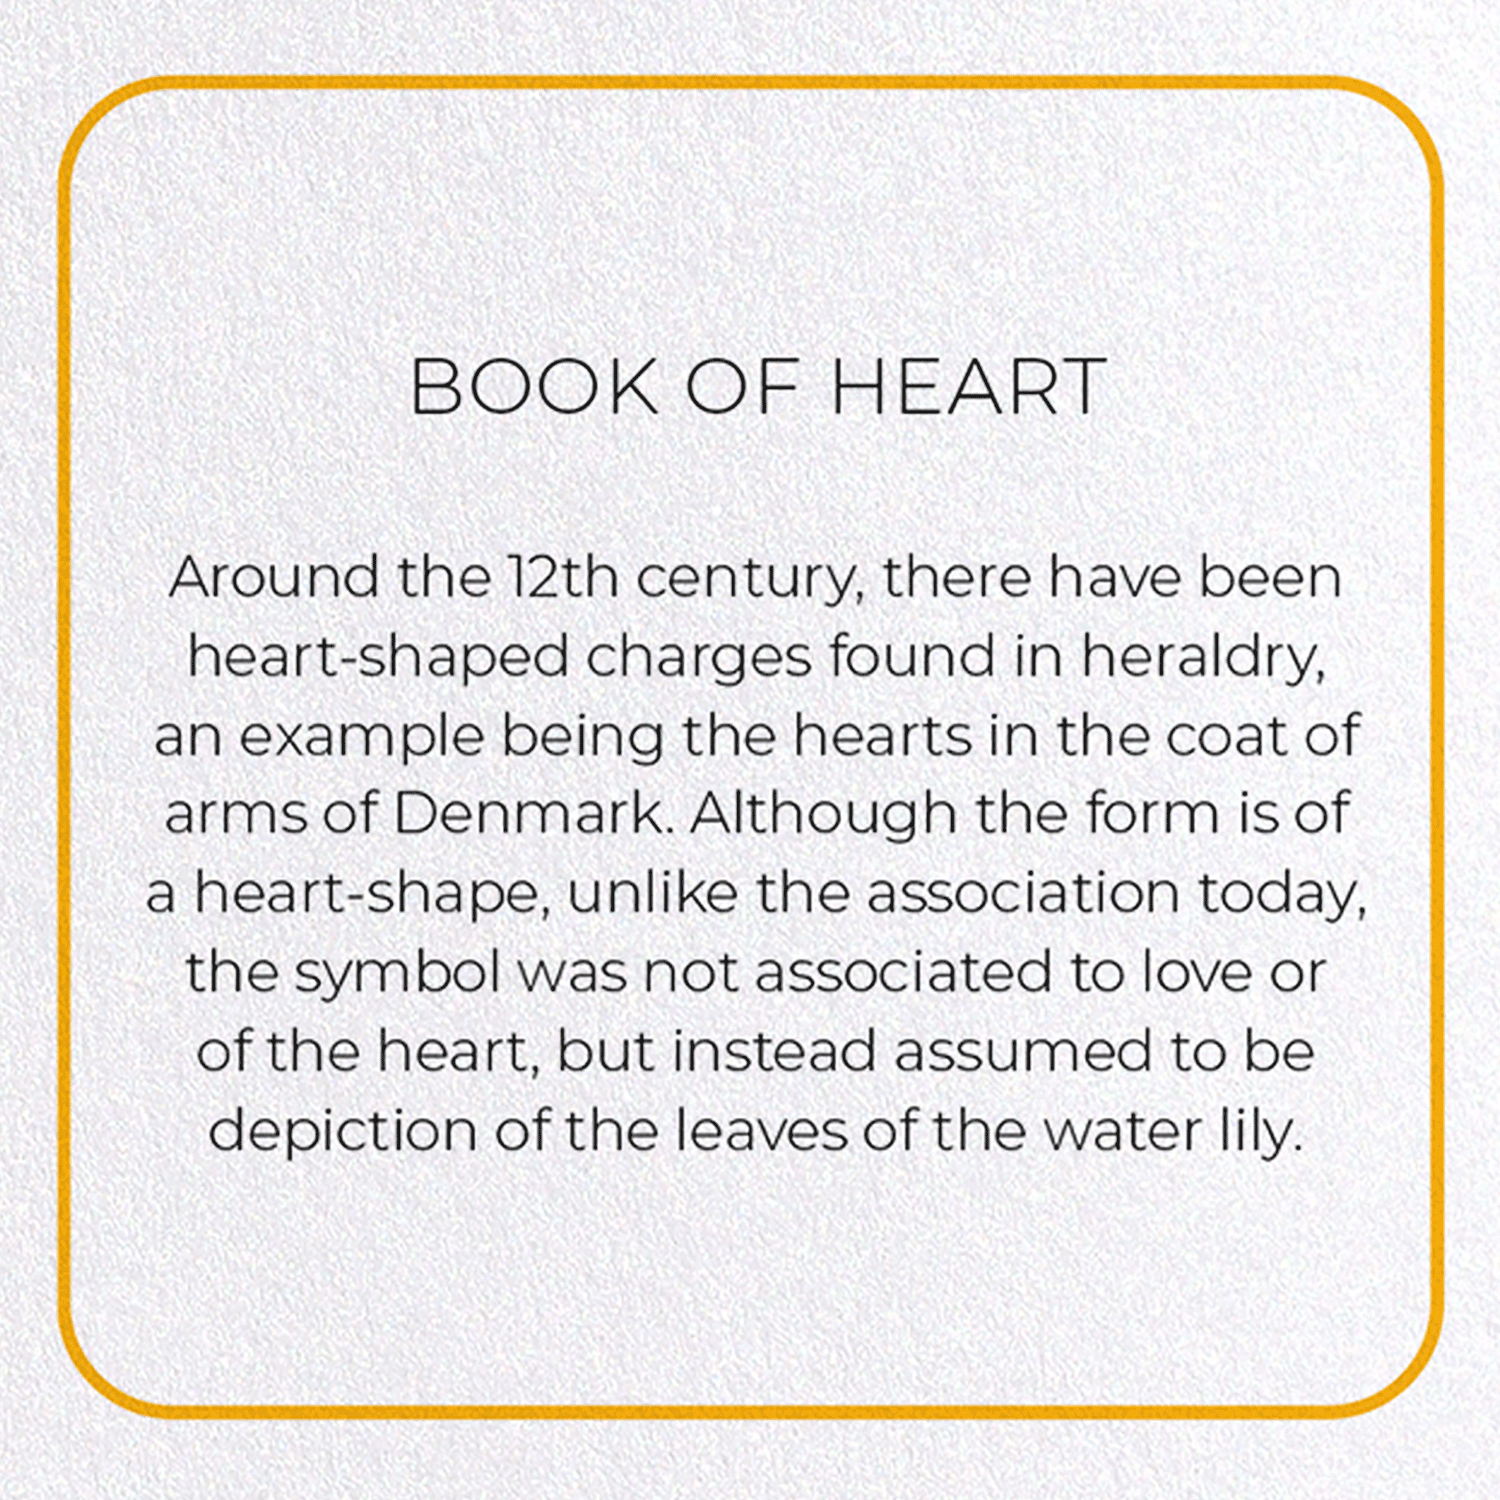 BOOK OF HEART